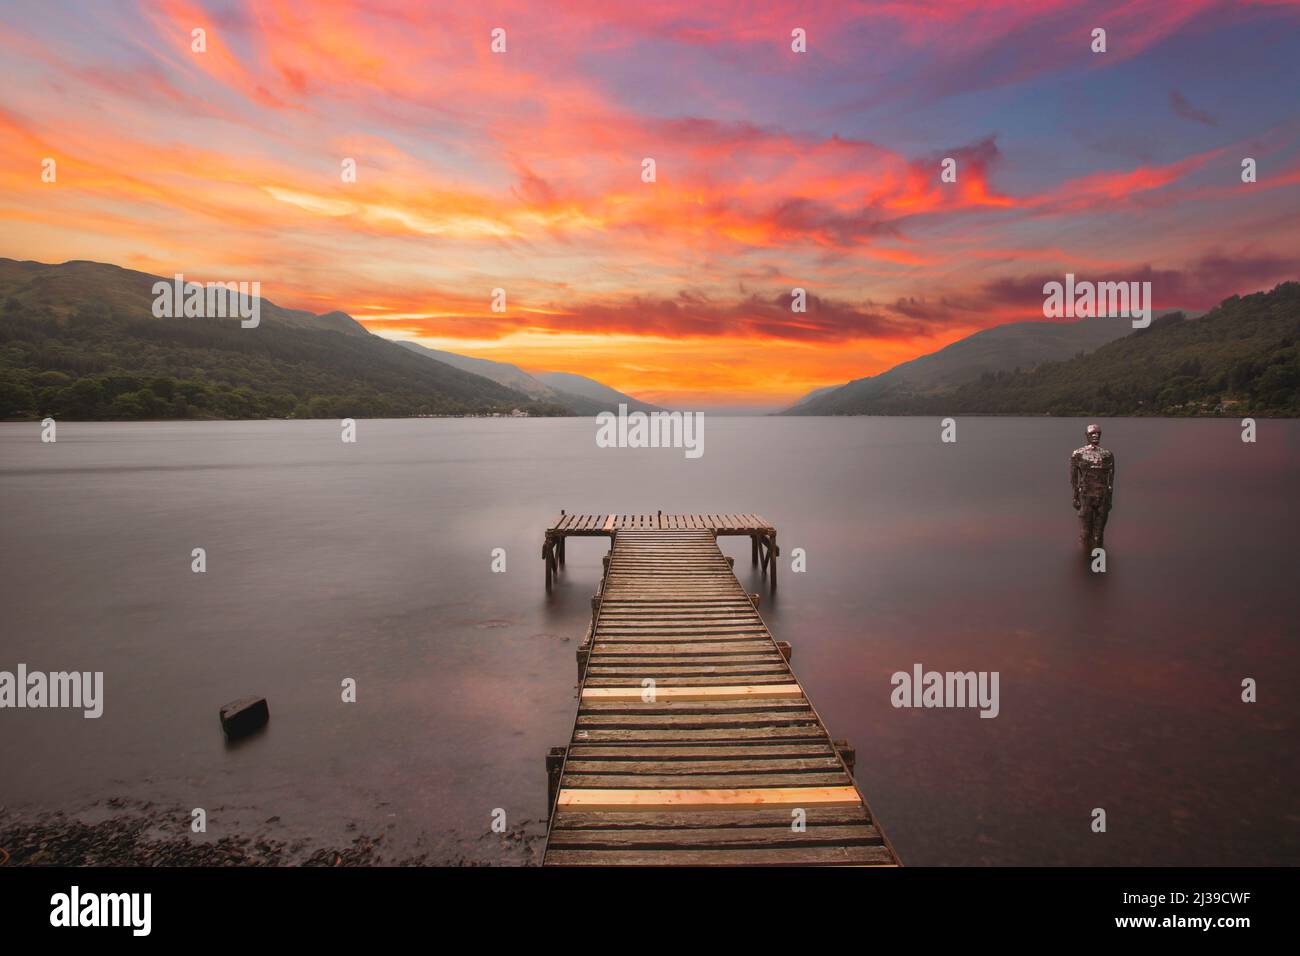 STILL, a seasonal installation by Rob Mulholland, stands among the waves during amazing sunset in Loch Earn, Perthshire, Scotland. ST FILLANS Stock Photo